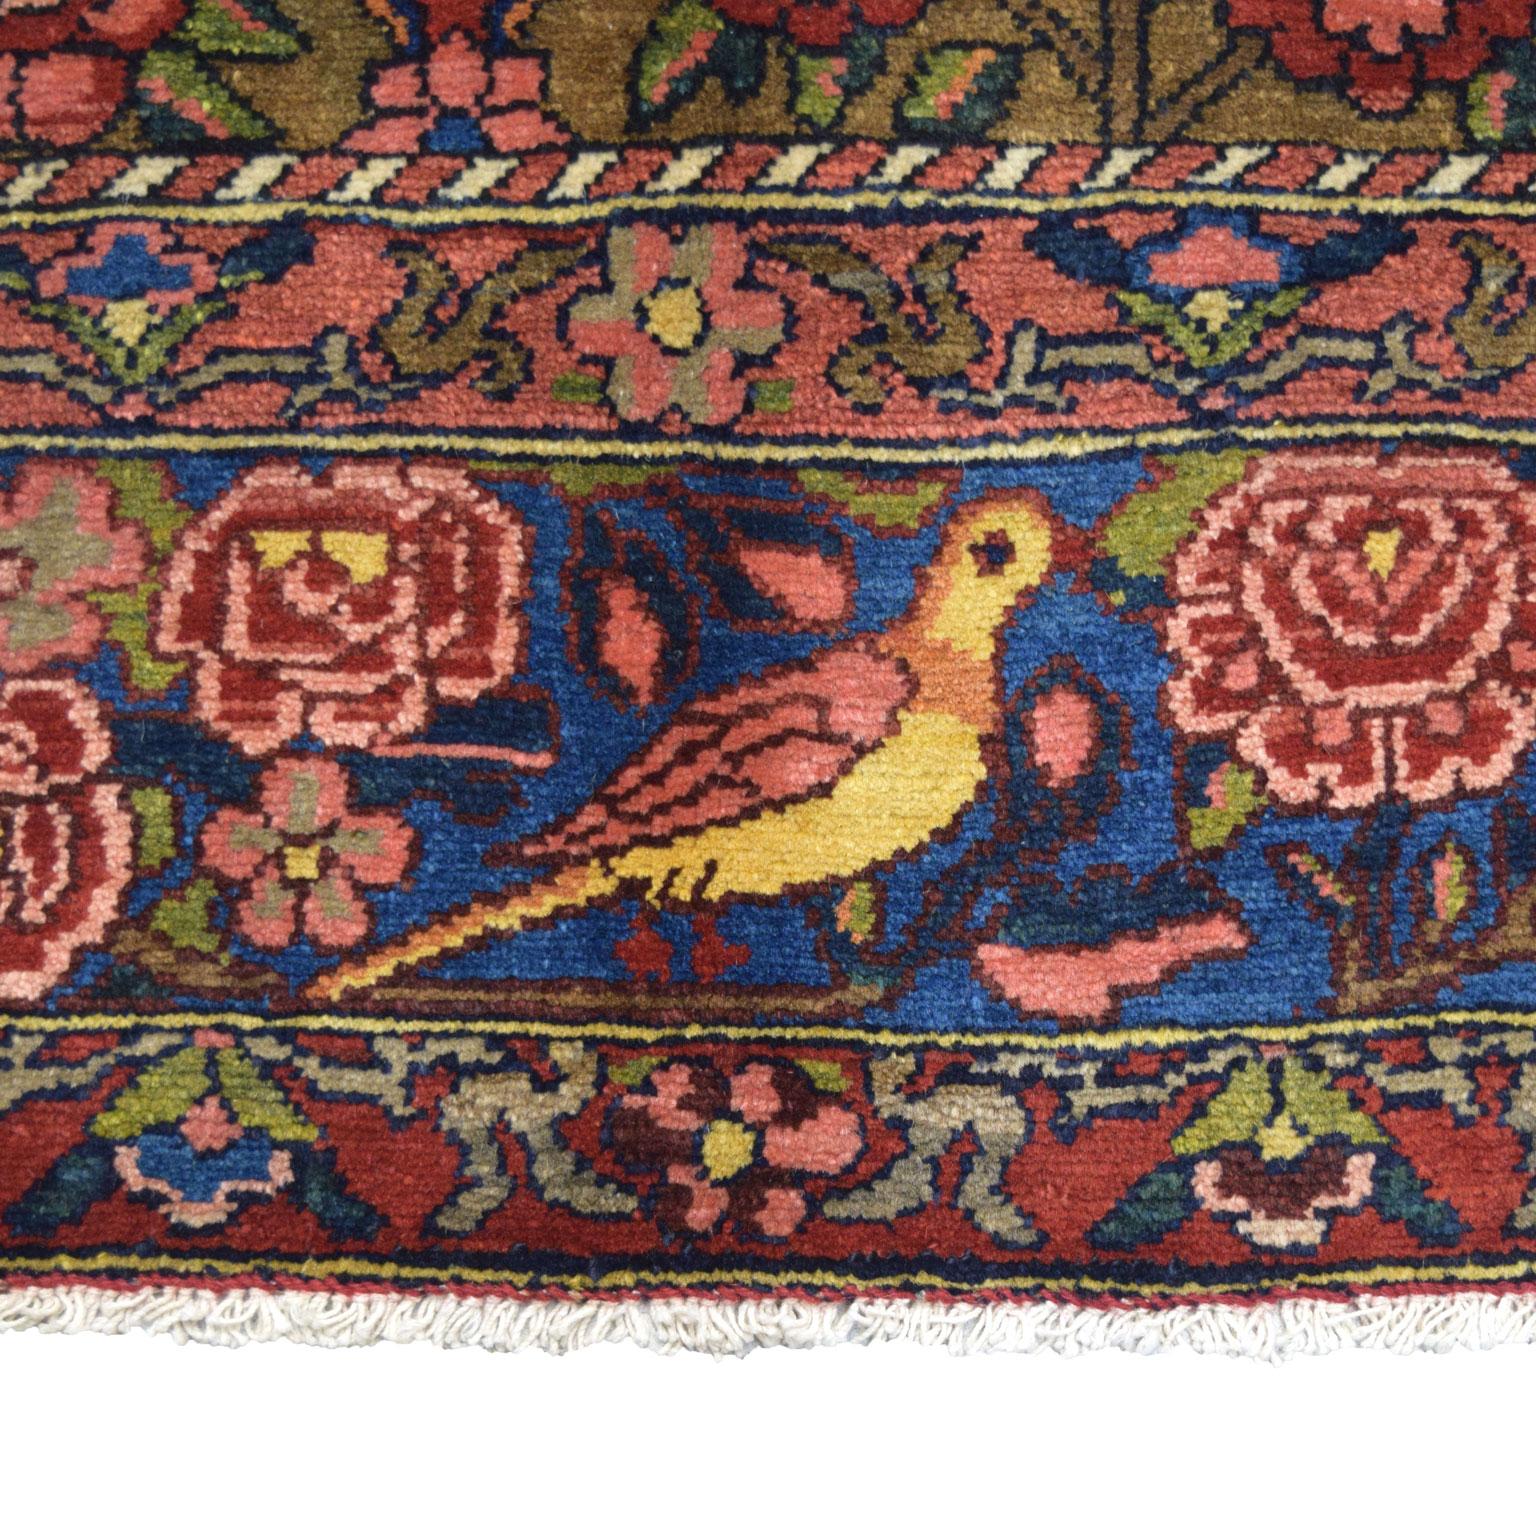 Antique 1920s Wool Persian Bibibaft Bakhtiari Rug in Gold, Red and Pink, 5' x 7' For Sale 4